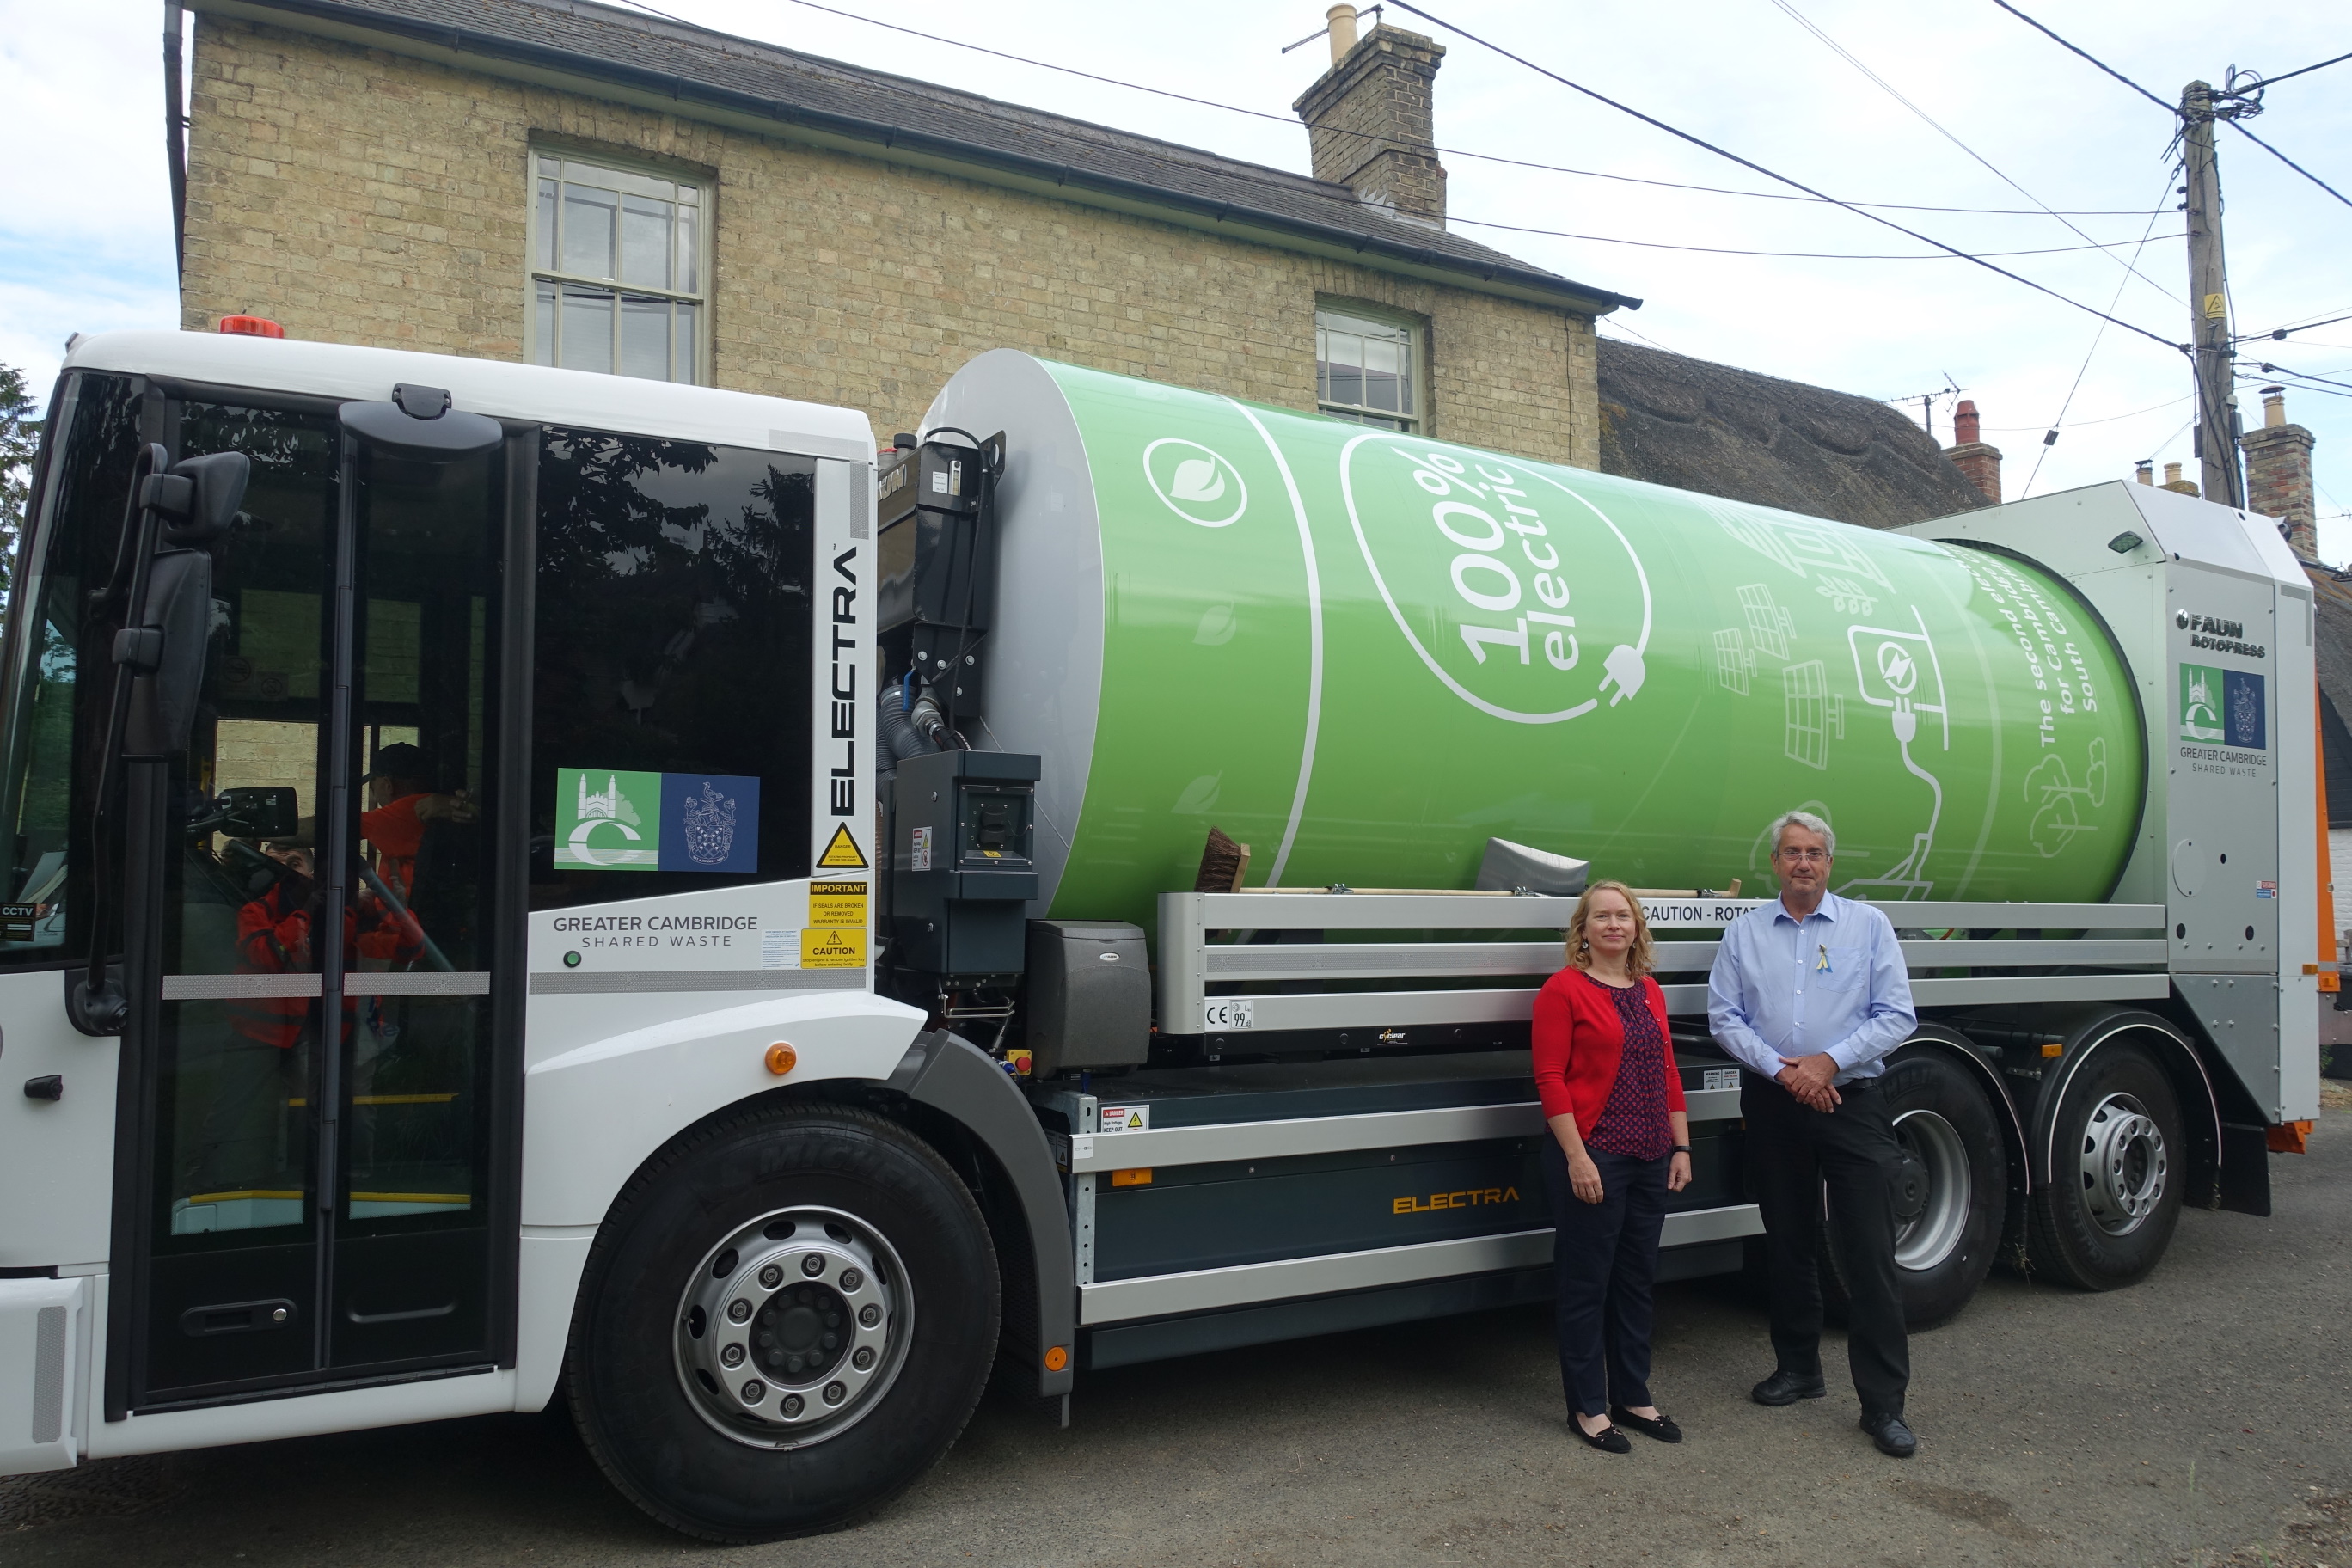 Cllr Brian Milnes and Cllr Rosy Moore with Greater Cambridge Shared Waste in front of a fully electric bin lorry